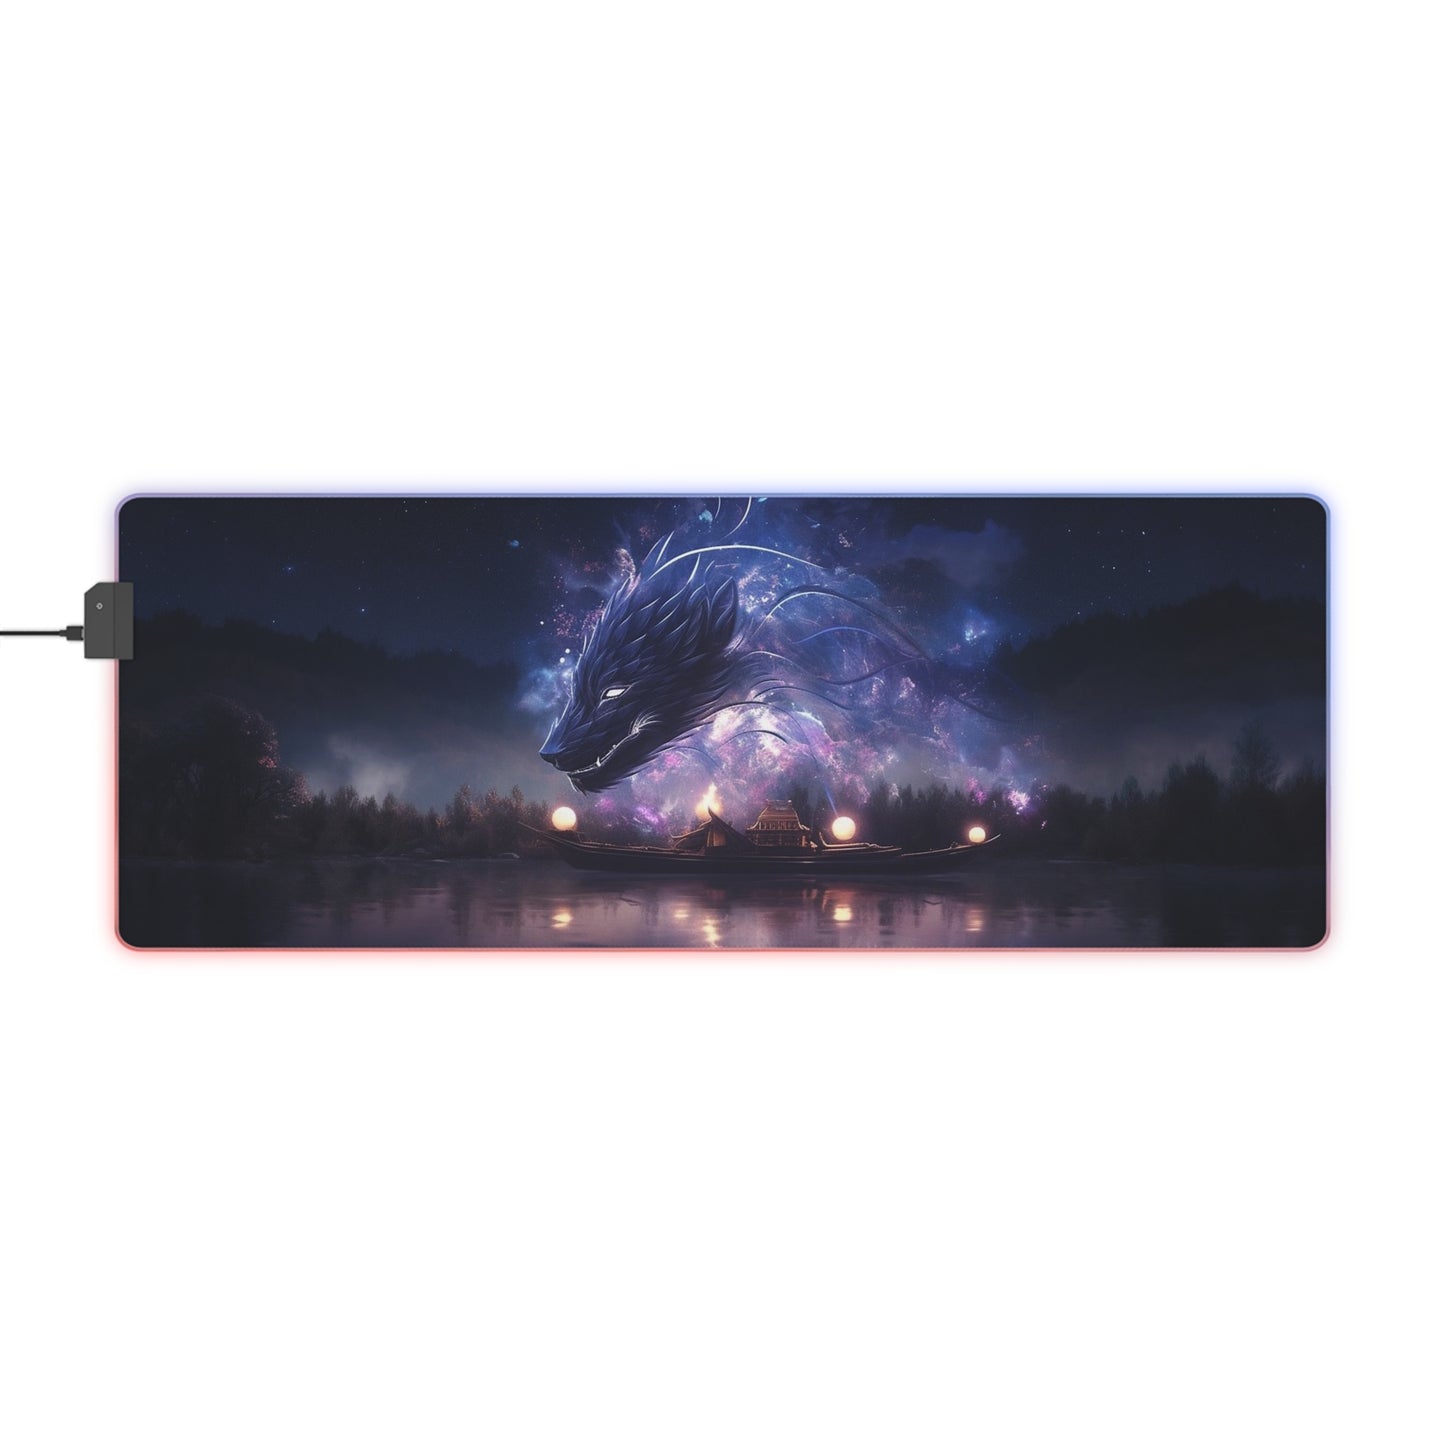 Spectral Guardian LED Gaming Mouse Pad